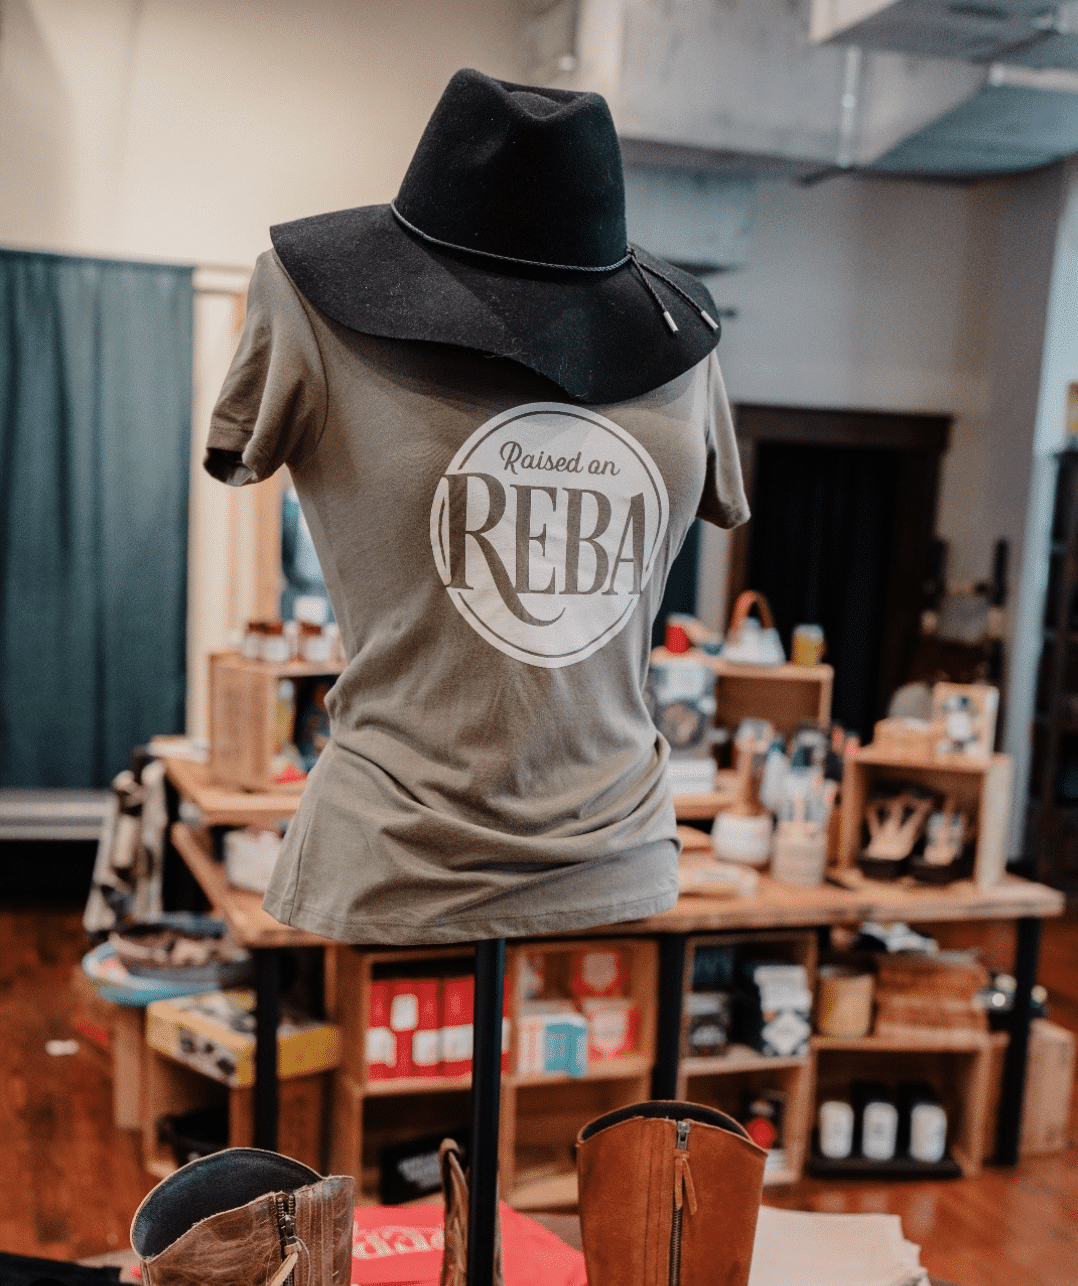 Exclusive merchandise from Reba's Place